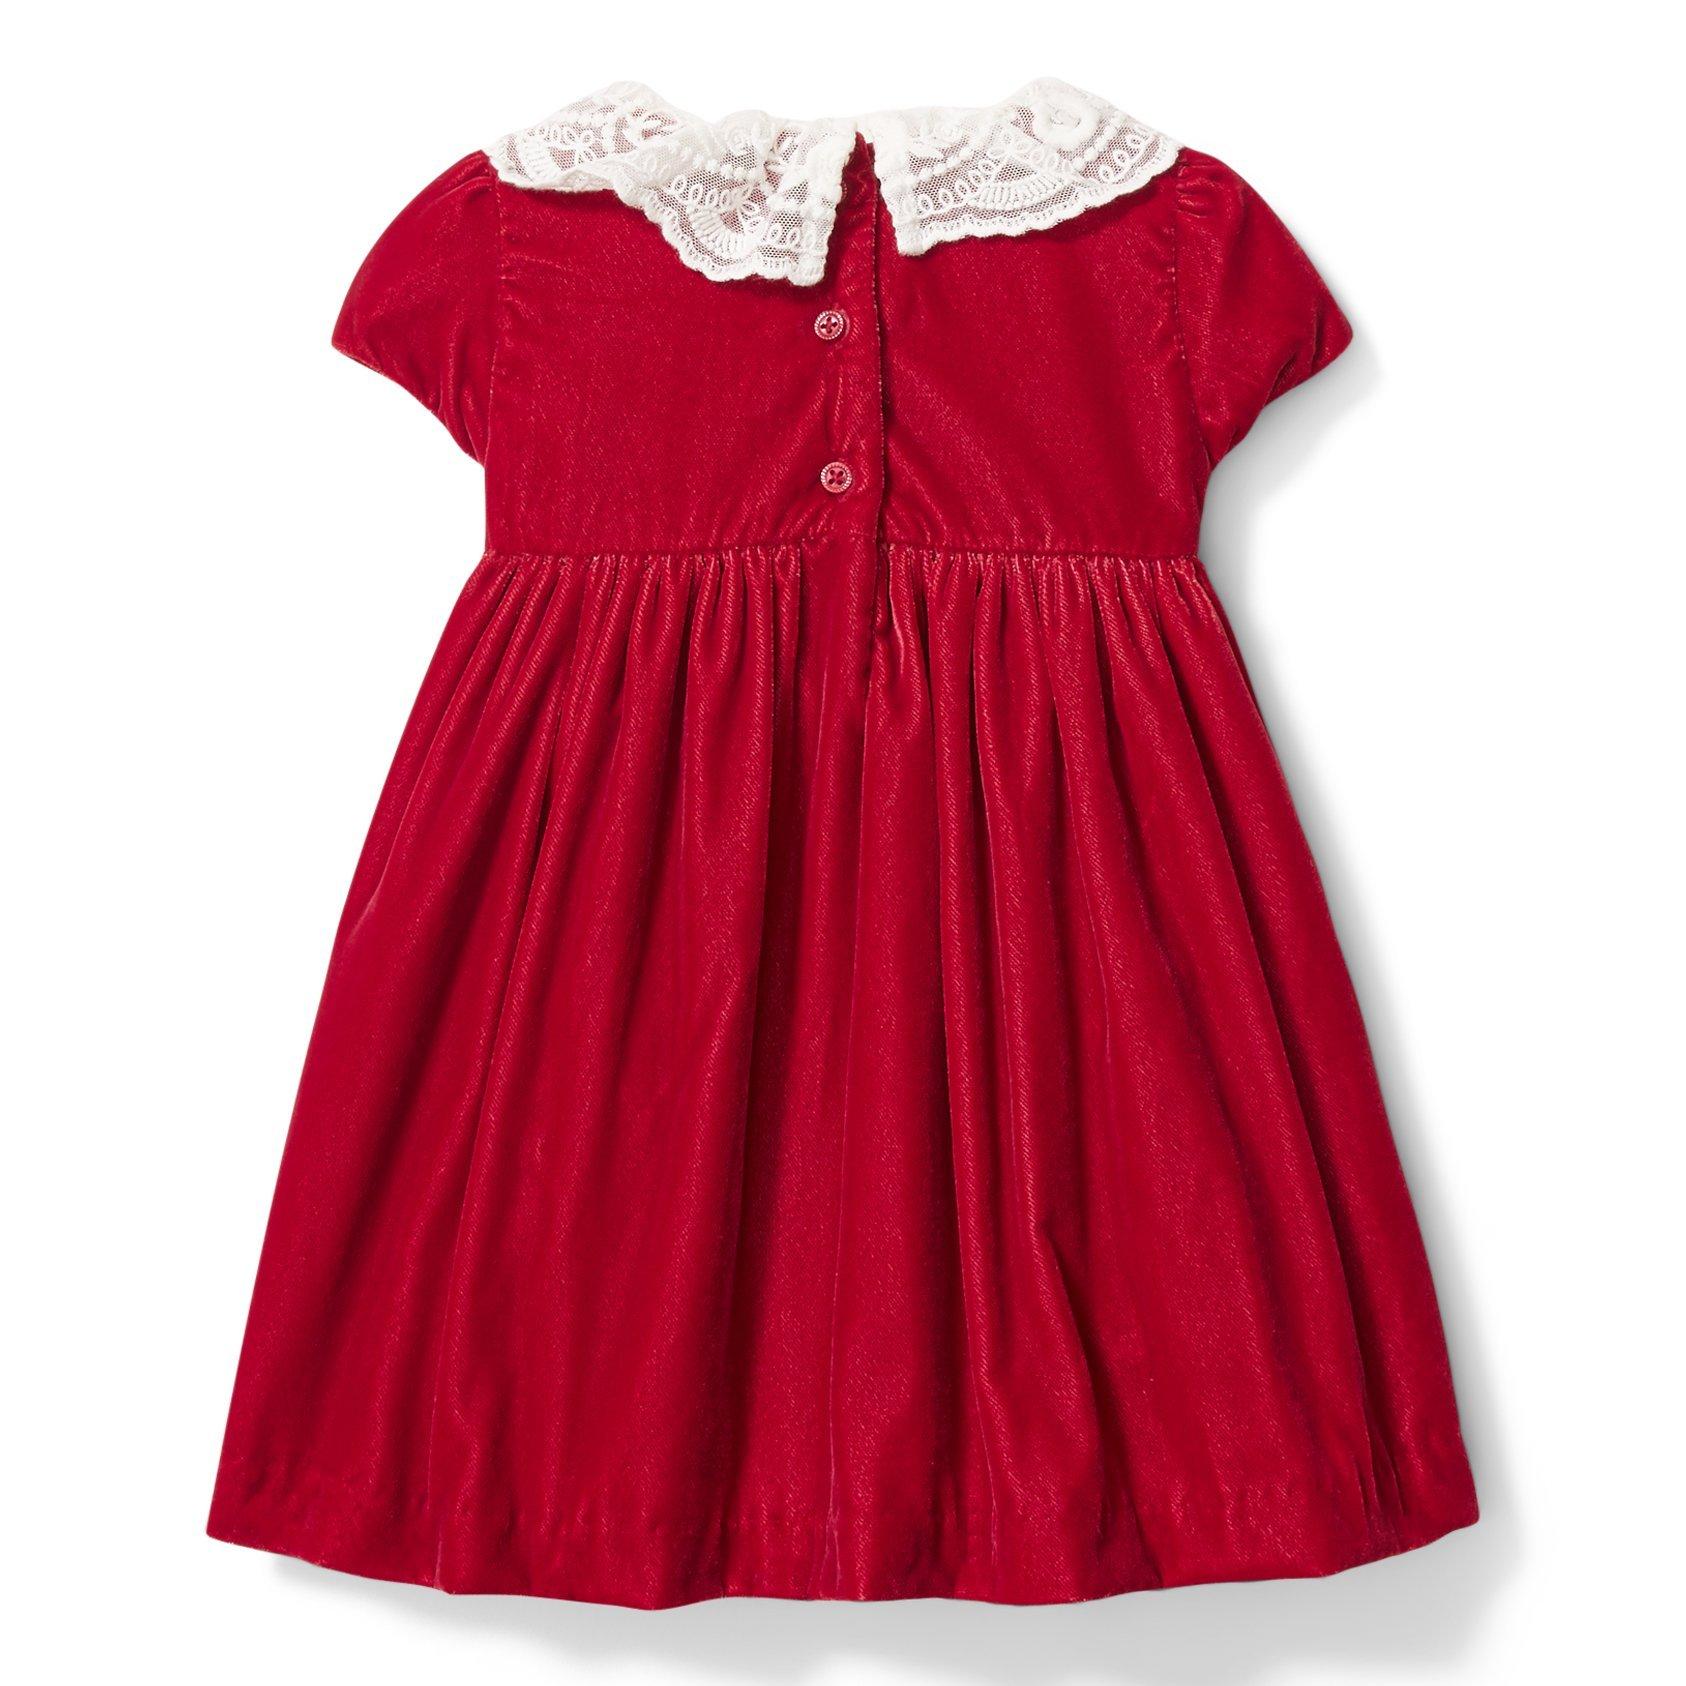 Newborn Holiday Red Baby Velvet Dress by Janie and Jack